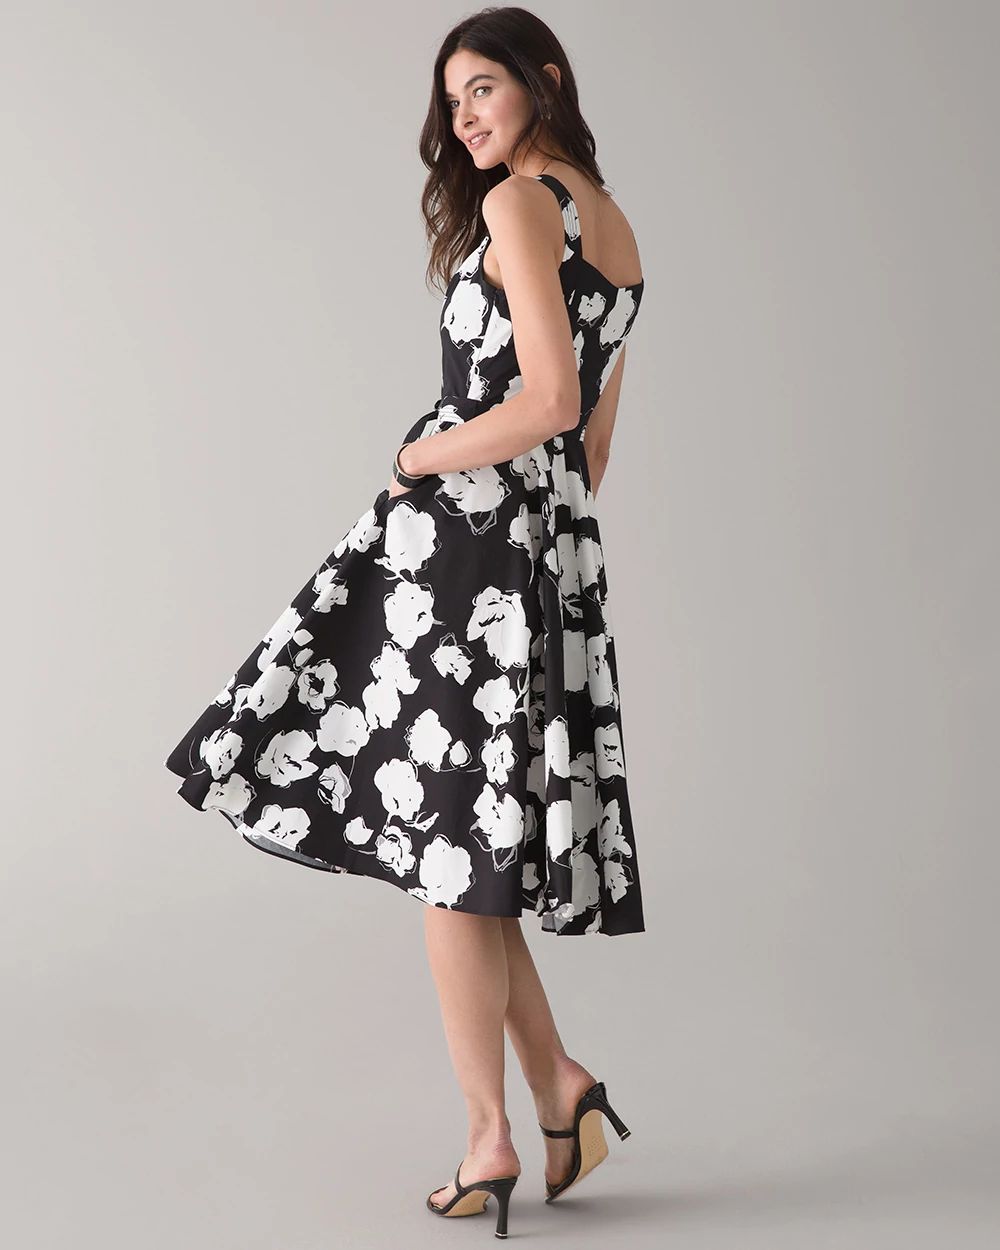 White + Black Fit & Flare Floral Dress click to view larger image.